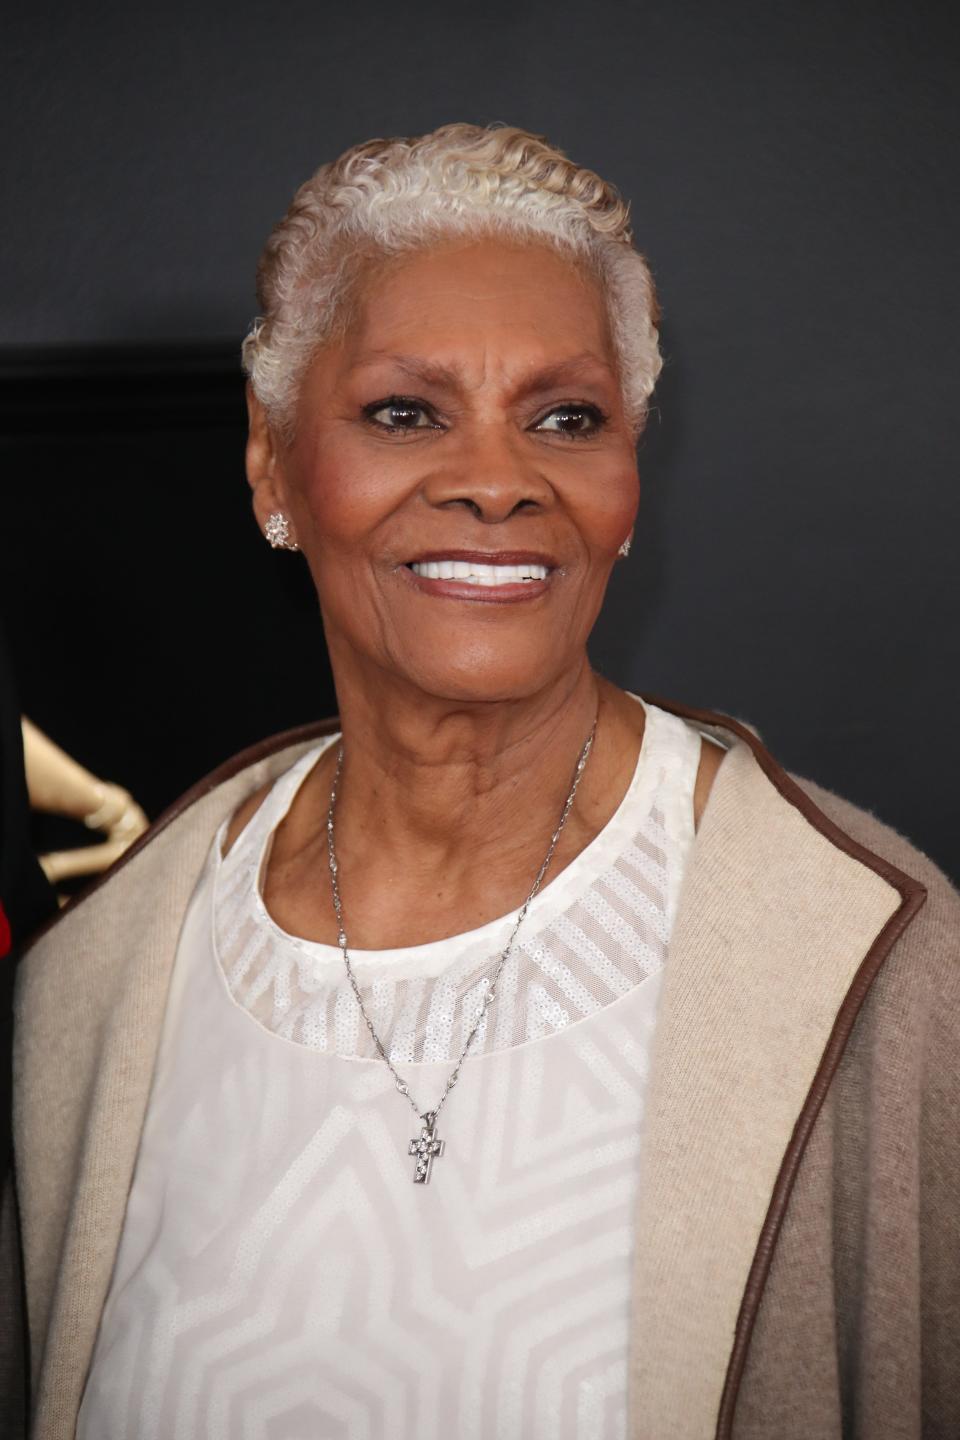 Dionne Warwick has won five Grammy Awards and received its Lifetime Achievement Award in 2019.